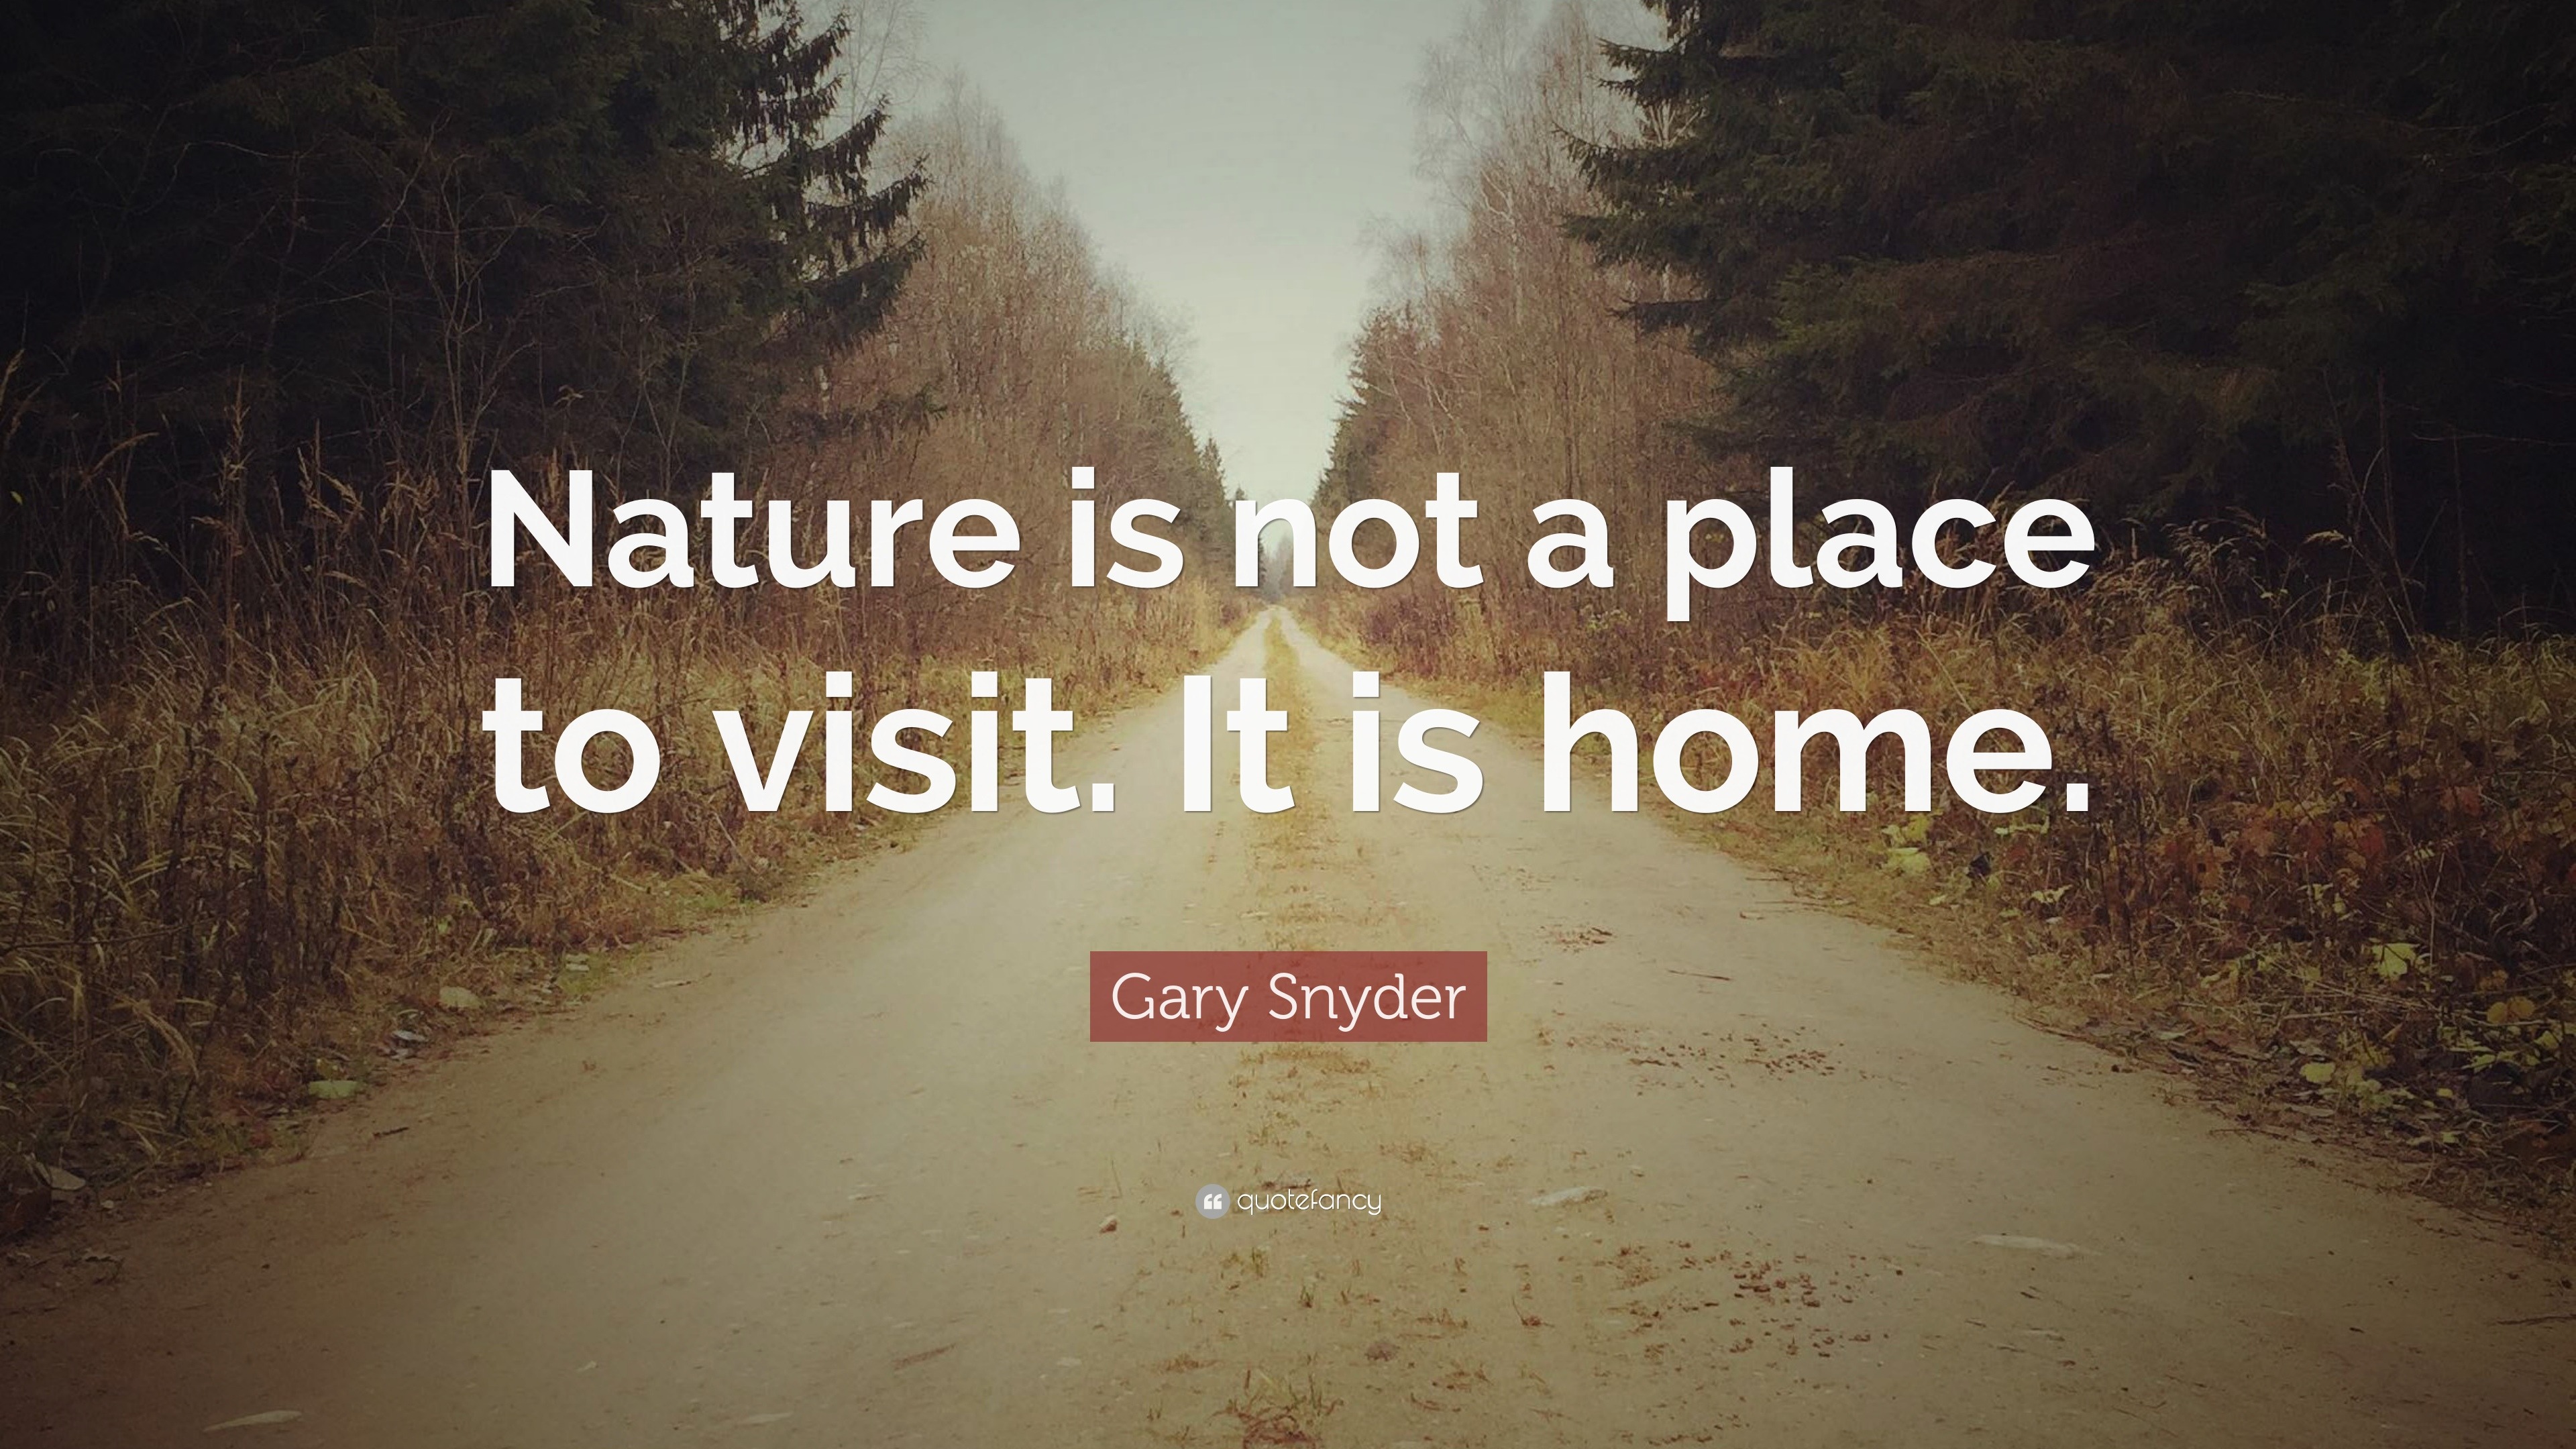 Gary Snyder Quote “Nature is not a place to visit. It is home.” (12